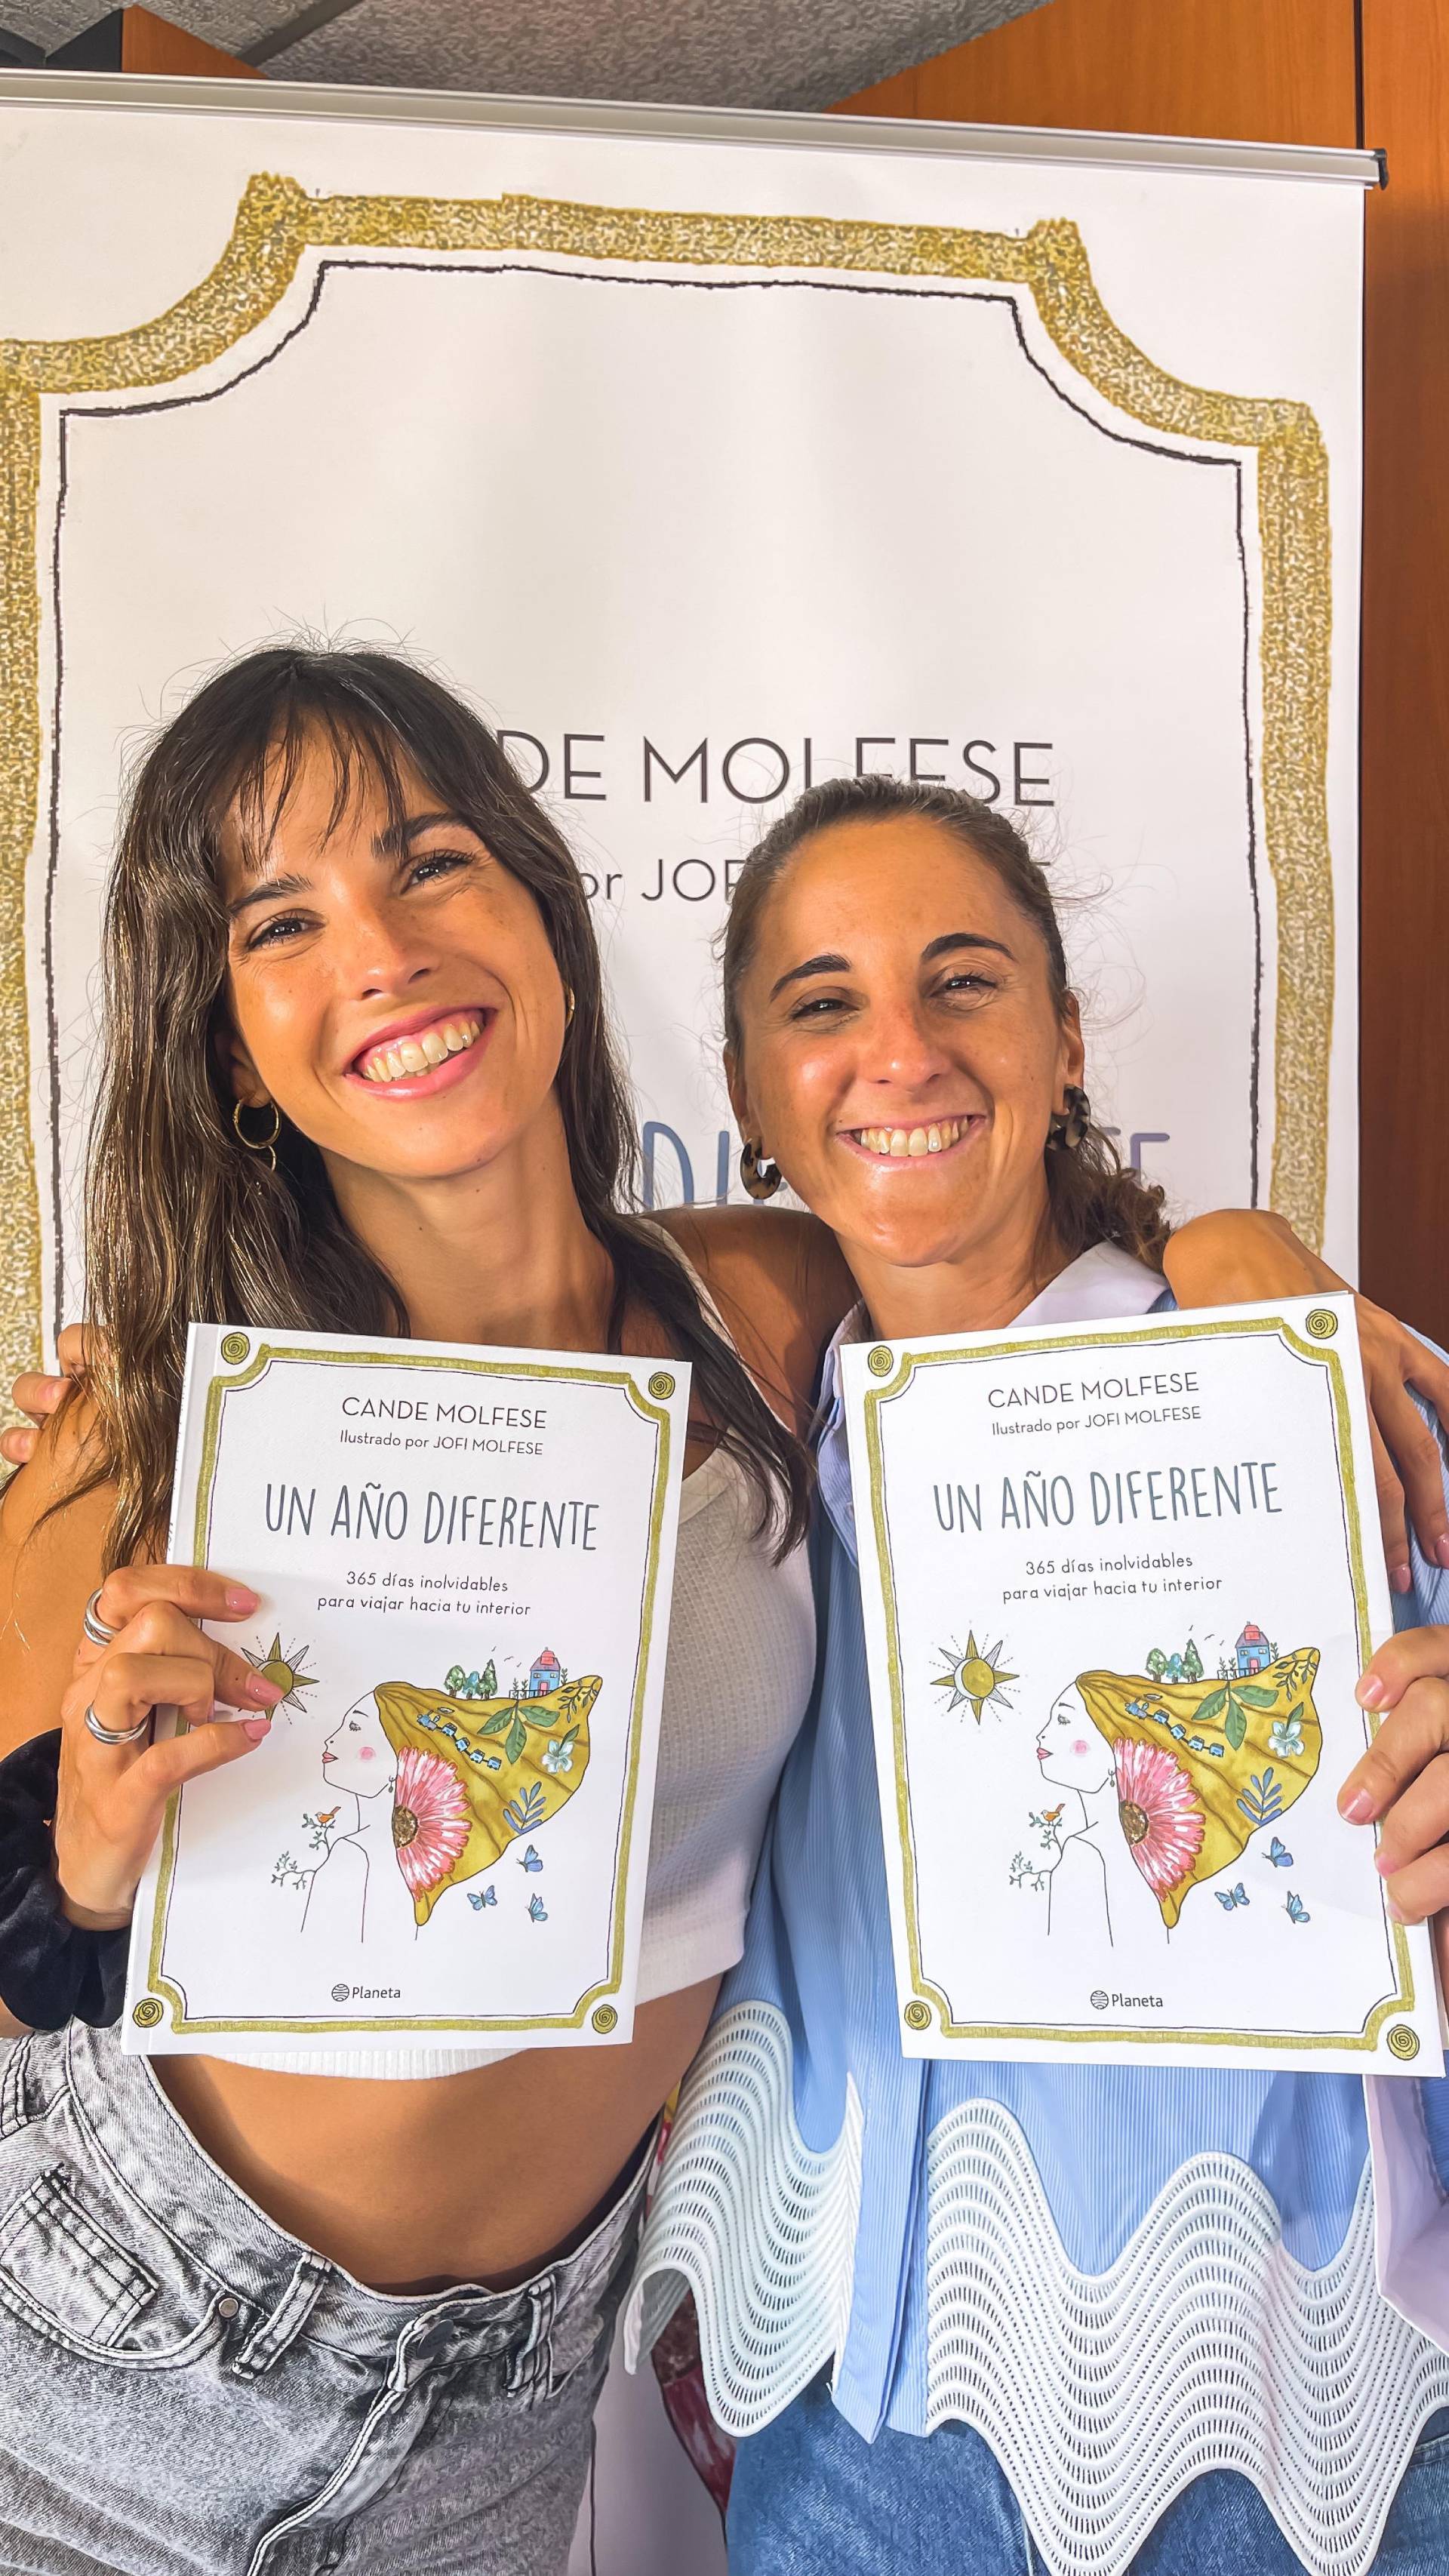 As part of the healing process, Cande Molfese and her sister created a self-help book